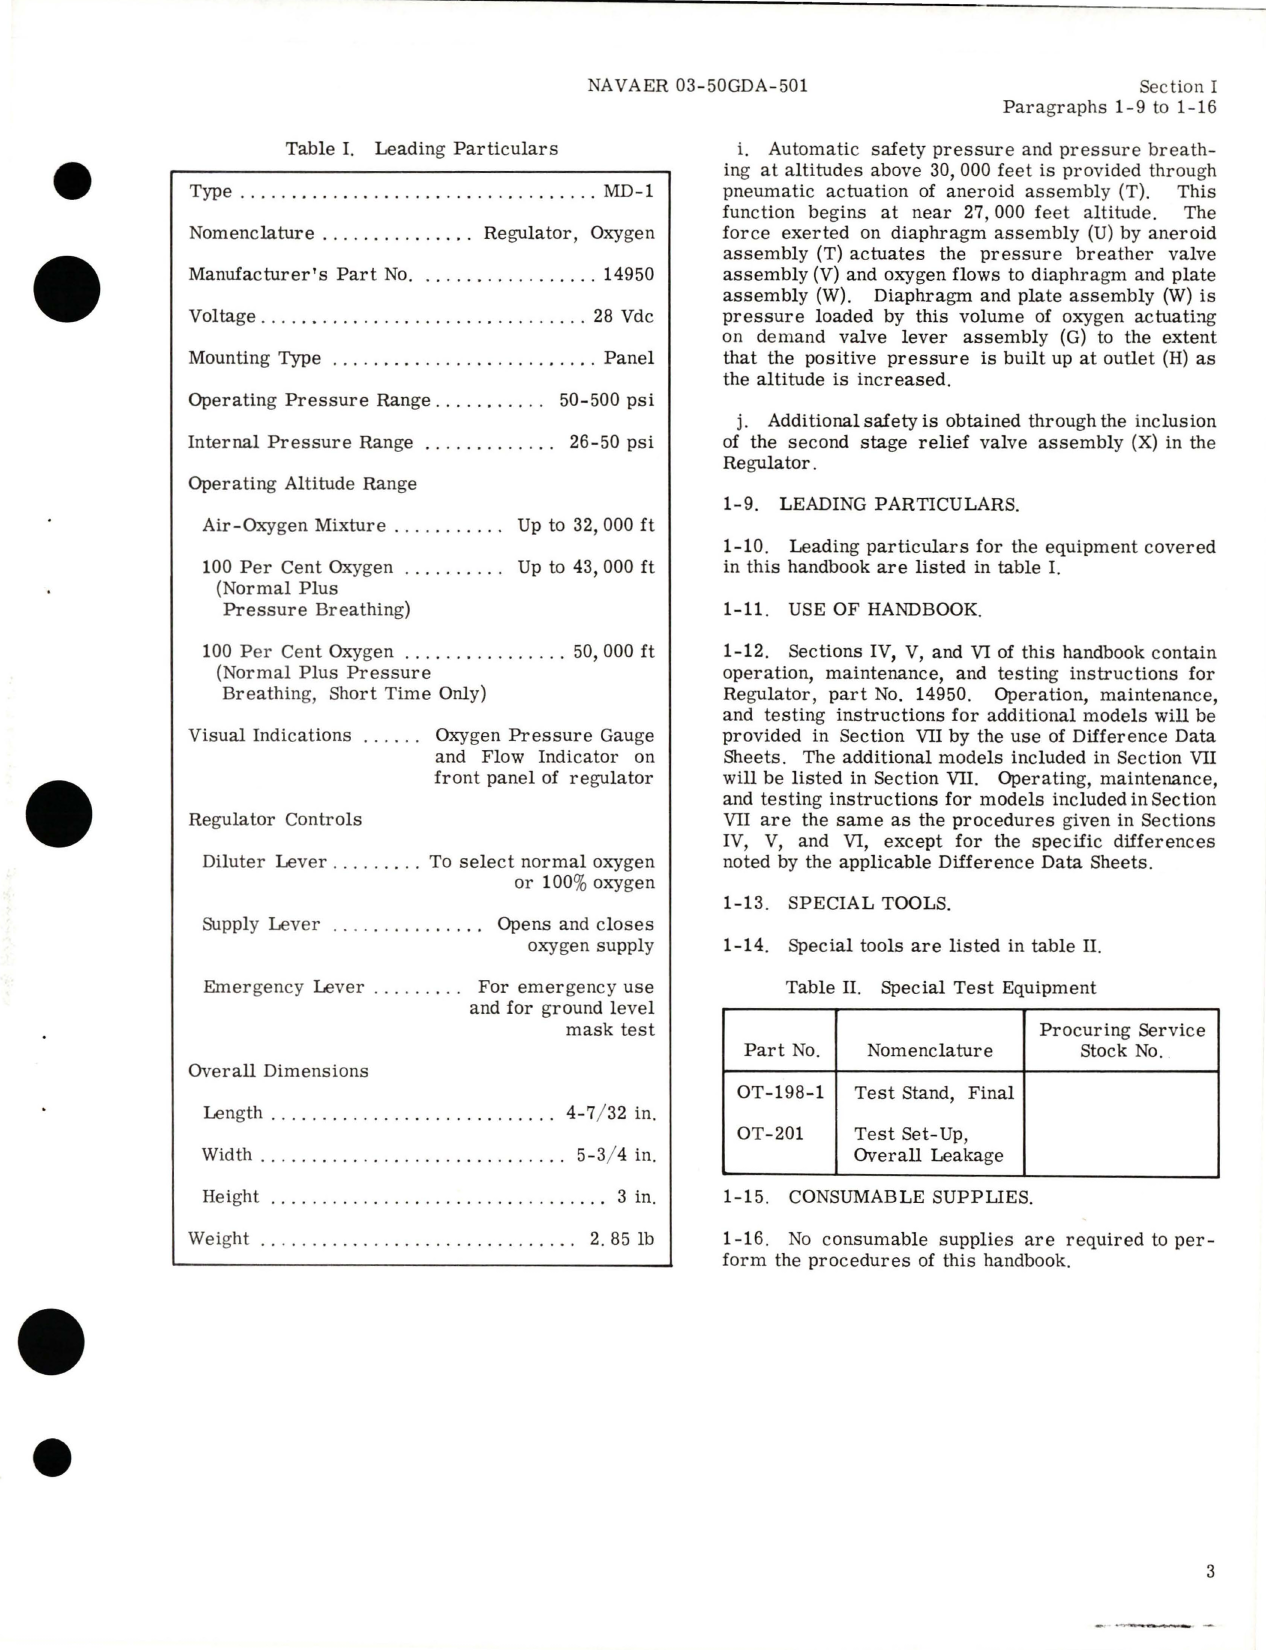 Sample page 7 from AirCorps Library document: Operation and Maintenance Instructions for Oxygen Regulator 